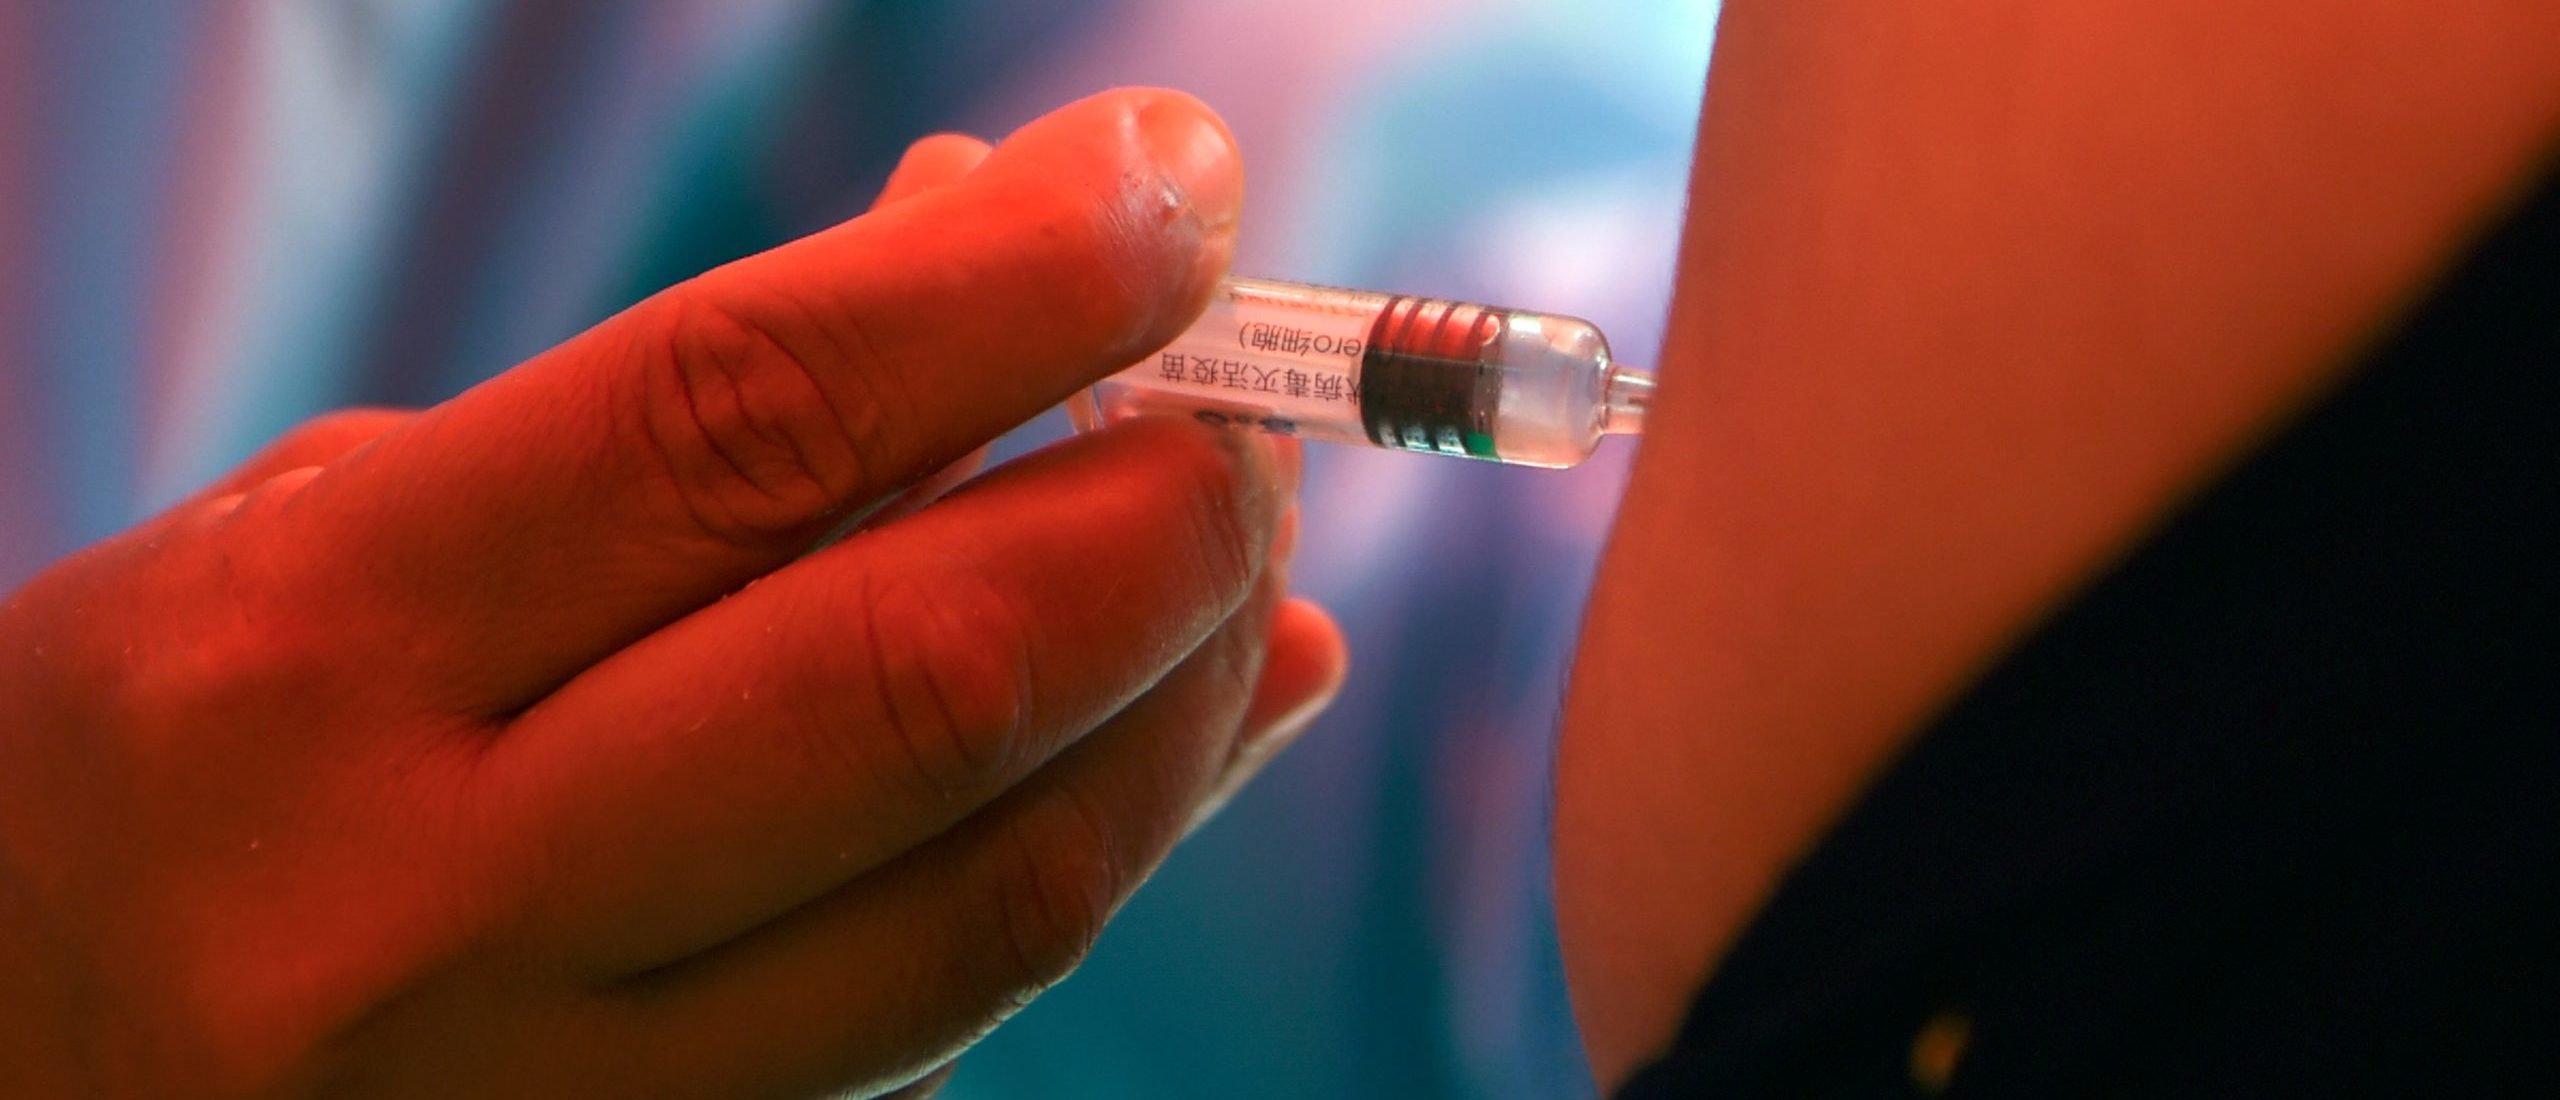 Is It Legal For Businesses To Require Customers To Be Vaccinated?